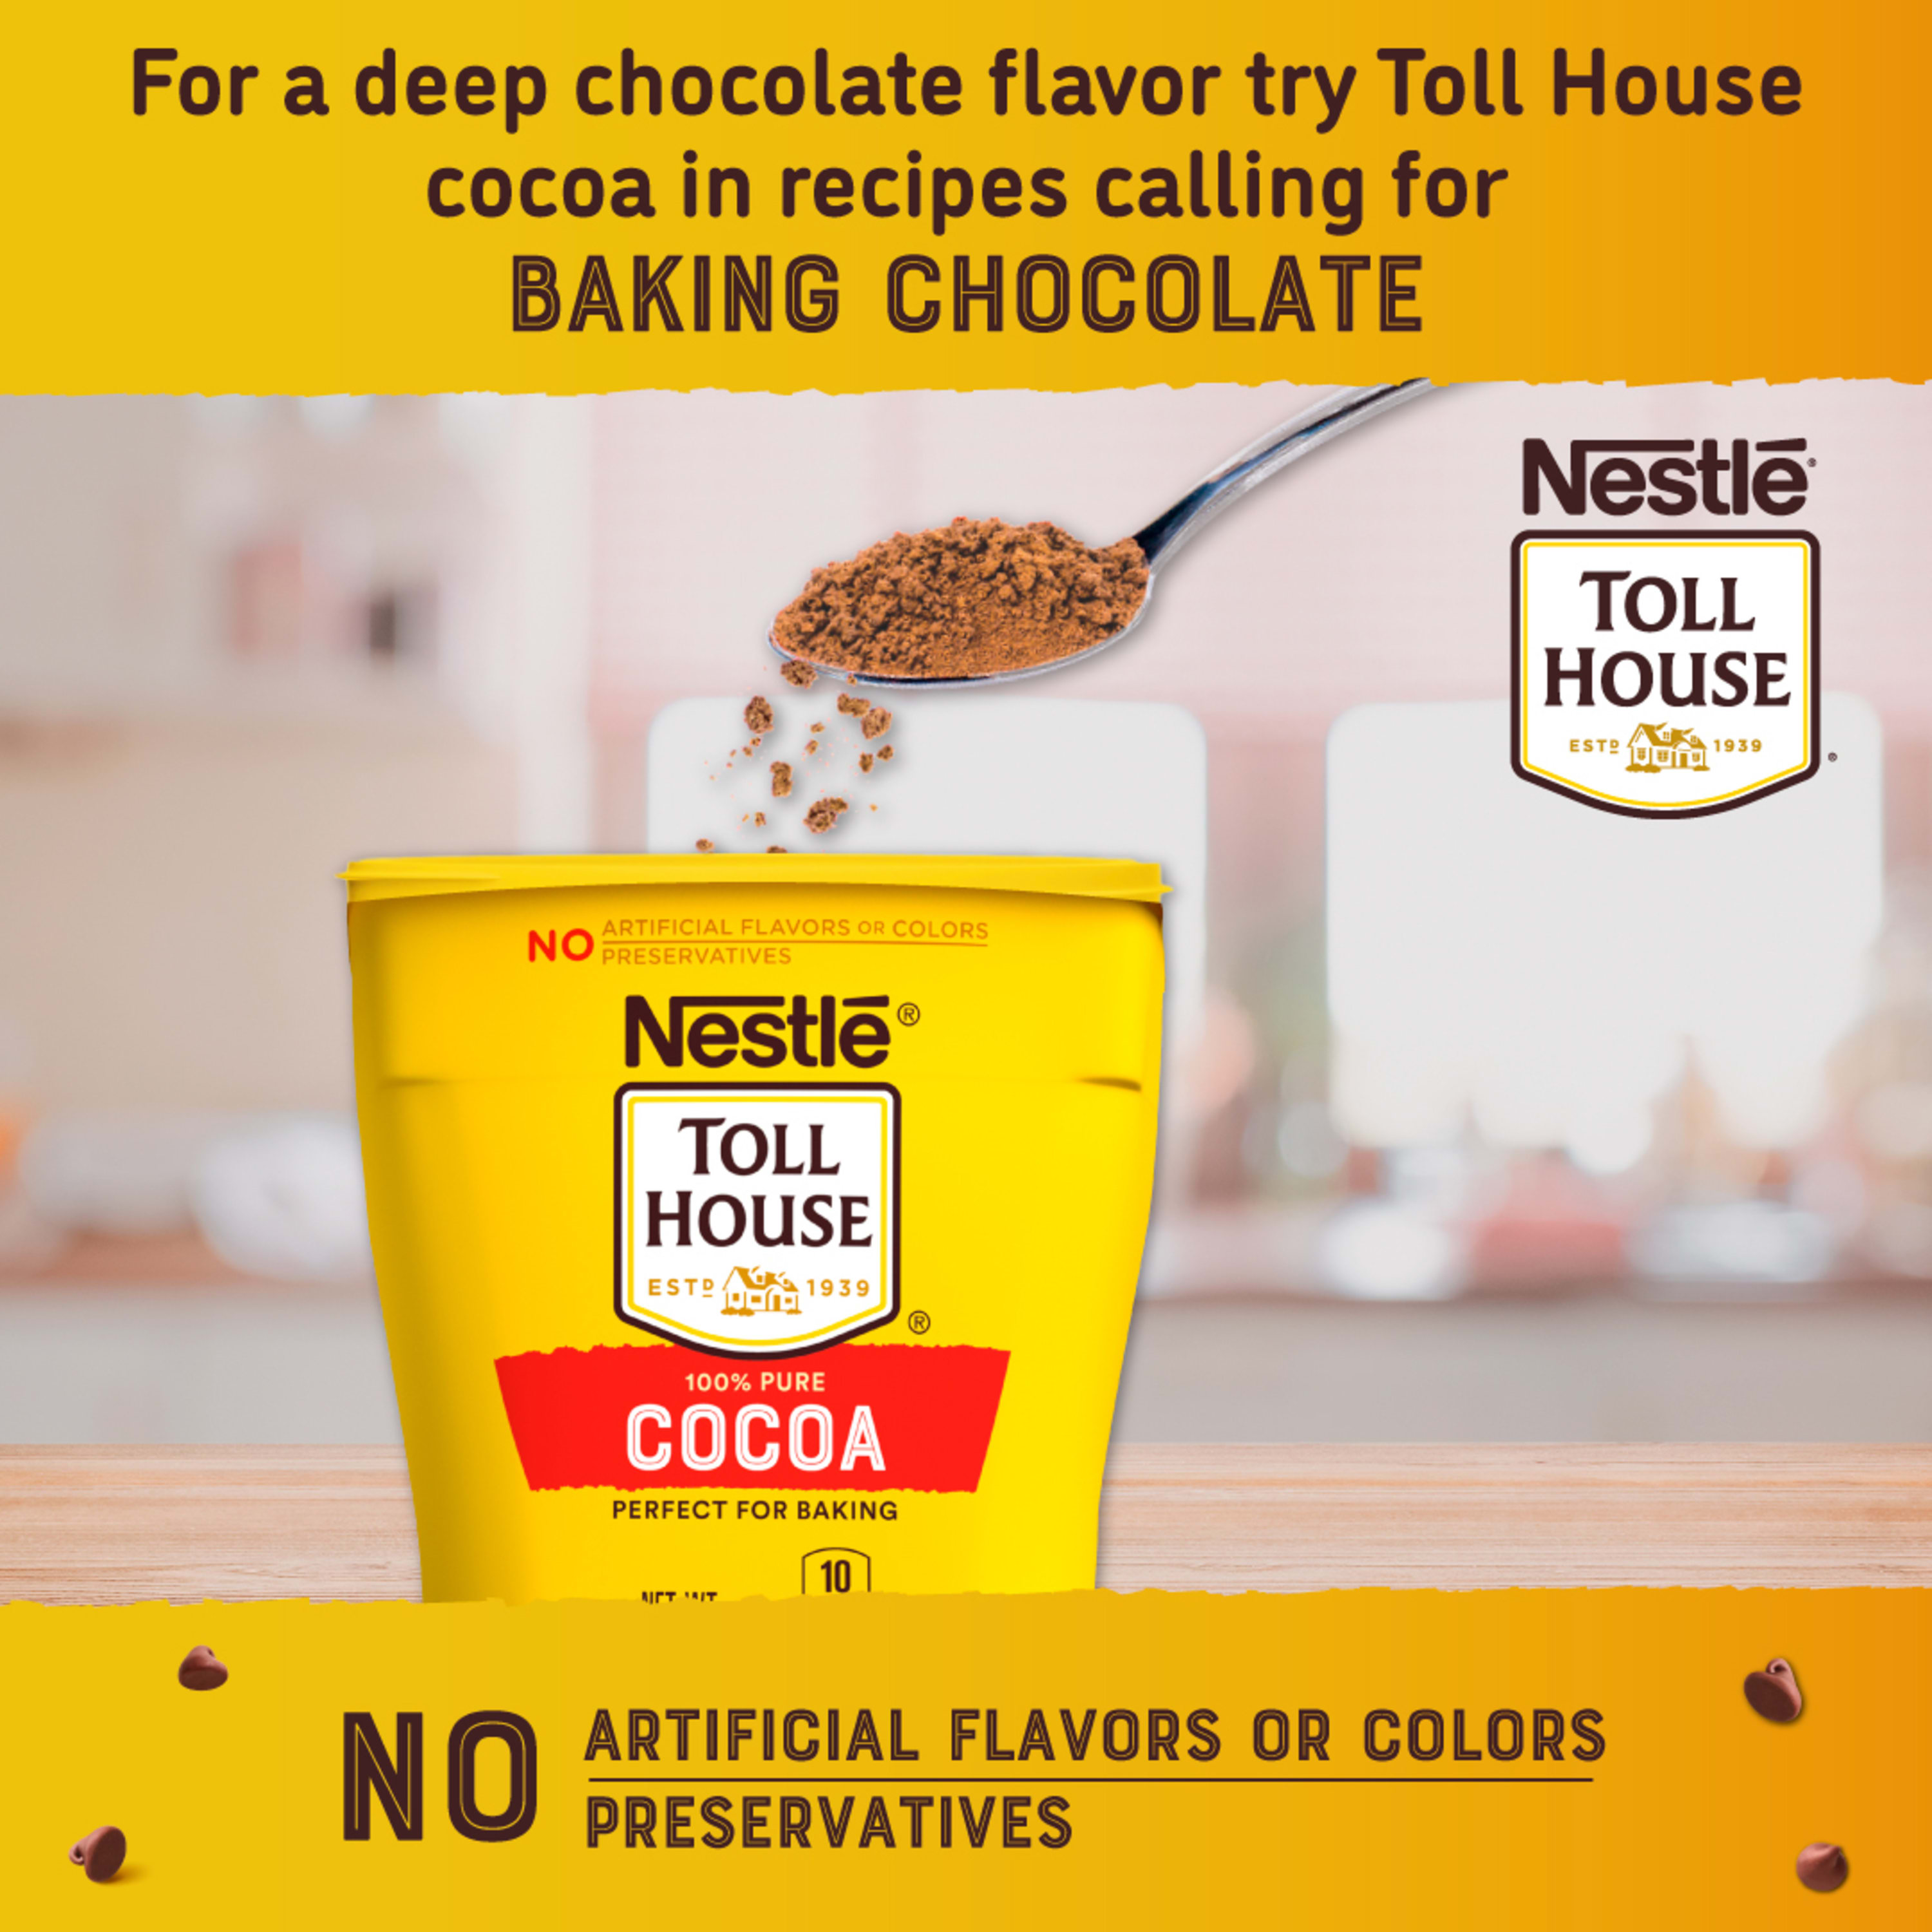 Nestle Toll House 100% Pure Cocoa, Deep Chocolate Flavor Poweder, 8 oz Box - image 3 of 10